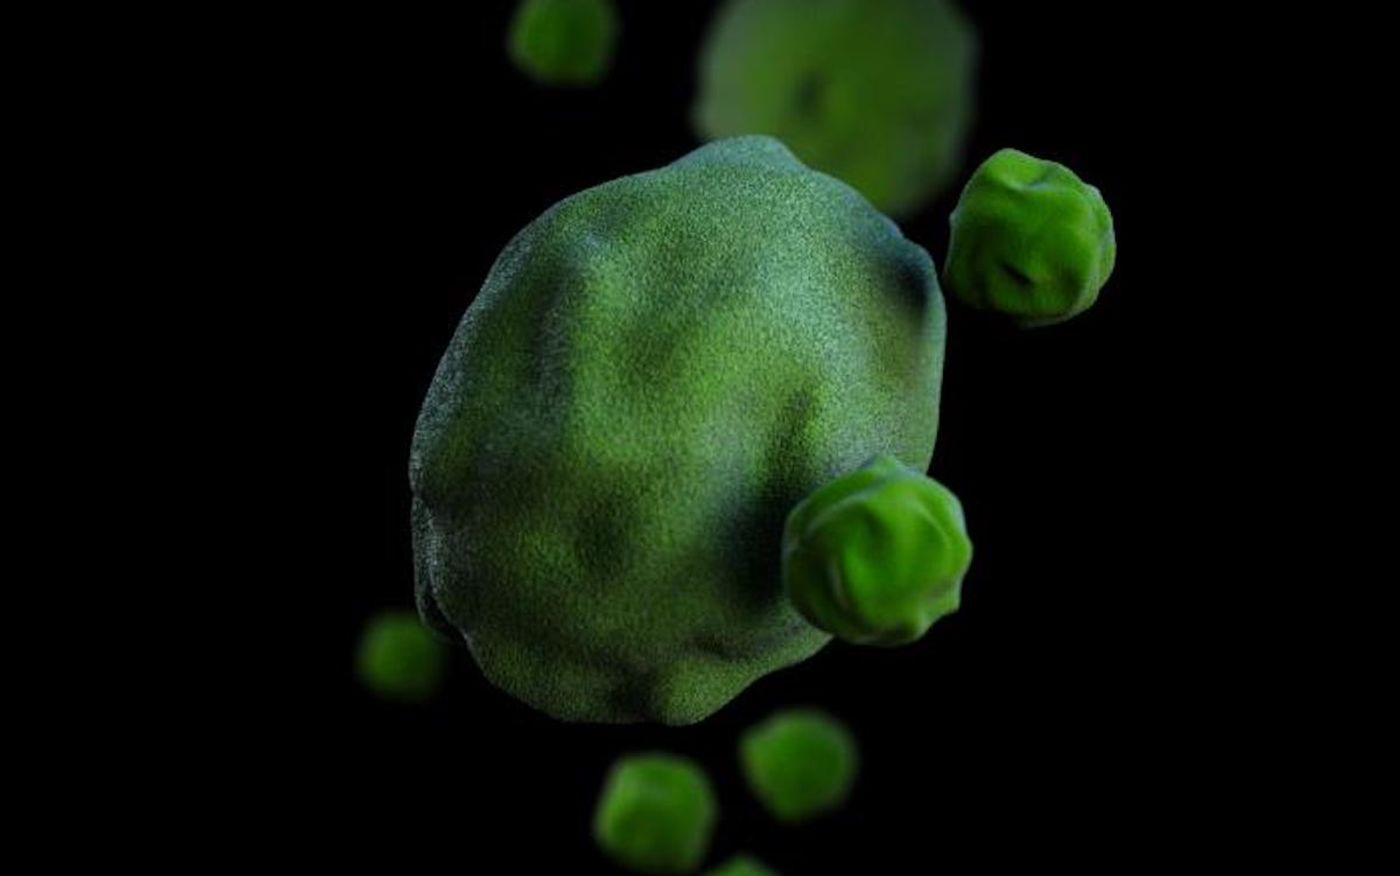 Image cropped from a computer-generated image of a group of Gram-negative, Chlamydia pneumoniae bacteria, based upon SEM imagery. / Credit: CDC/ Sarah Bailey Cutchin/Illustrators: Alissa Eckert; Robert Hobbs